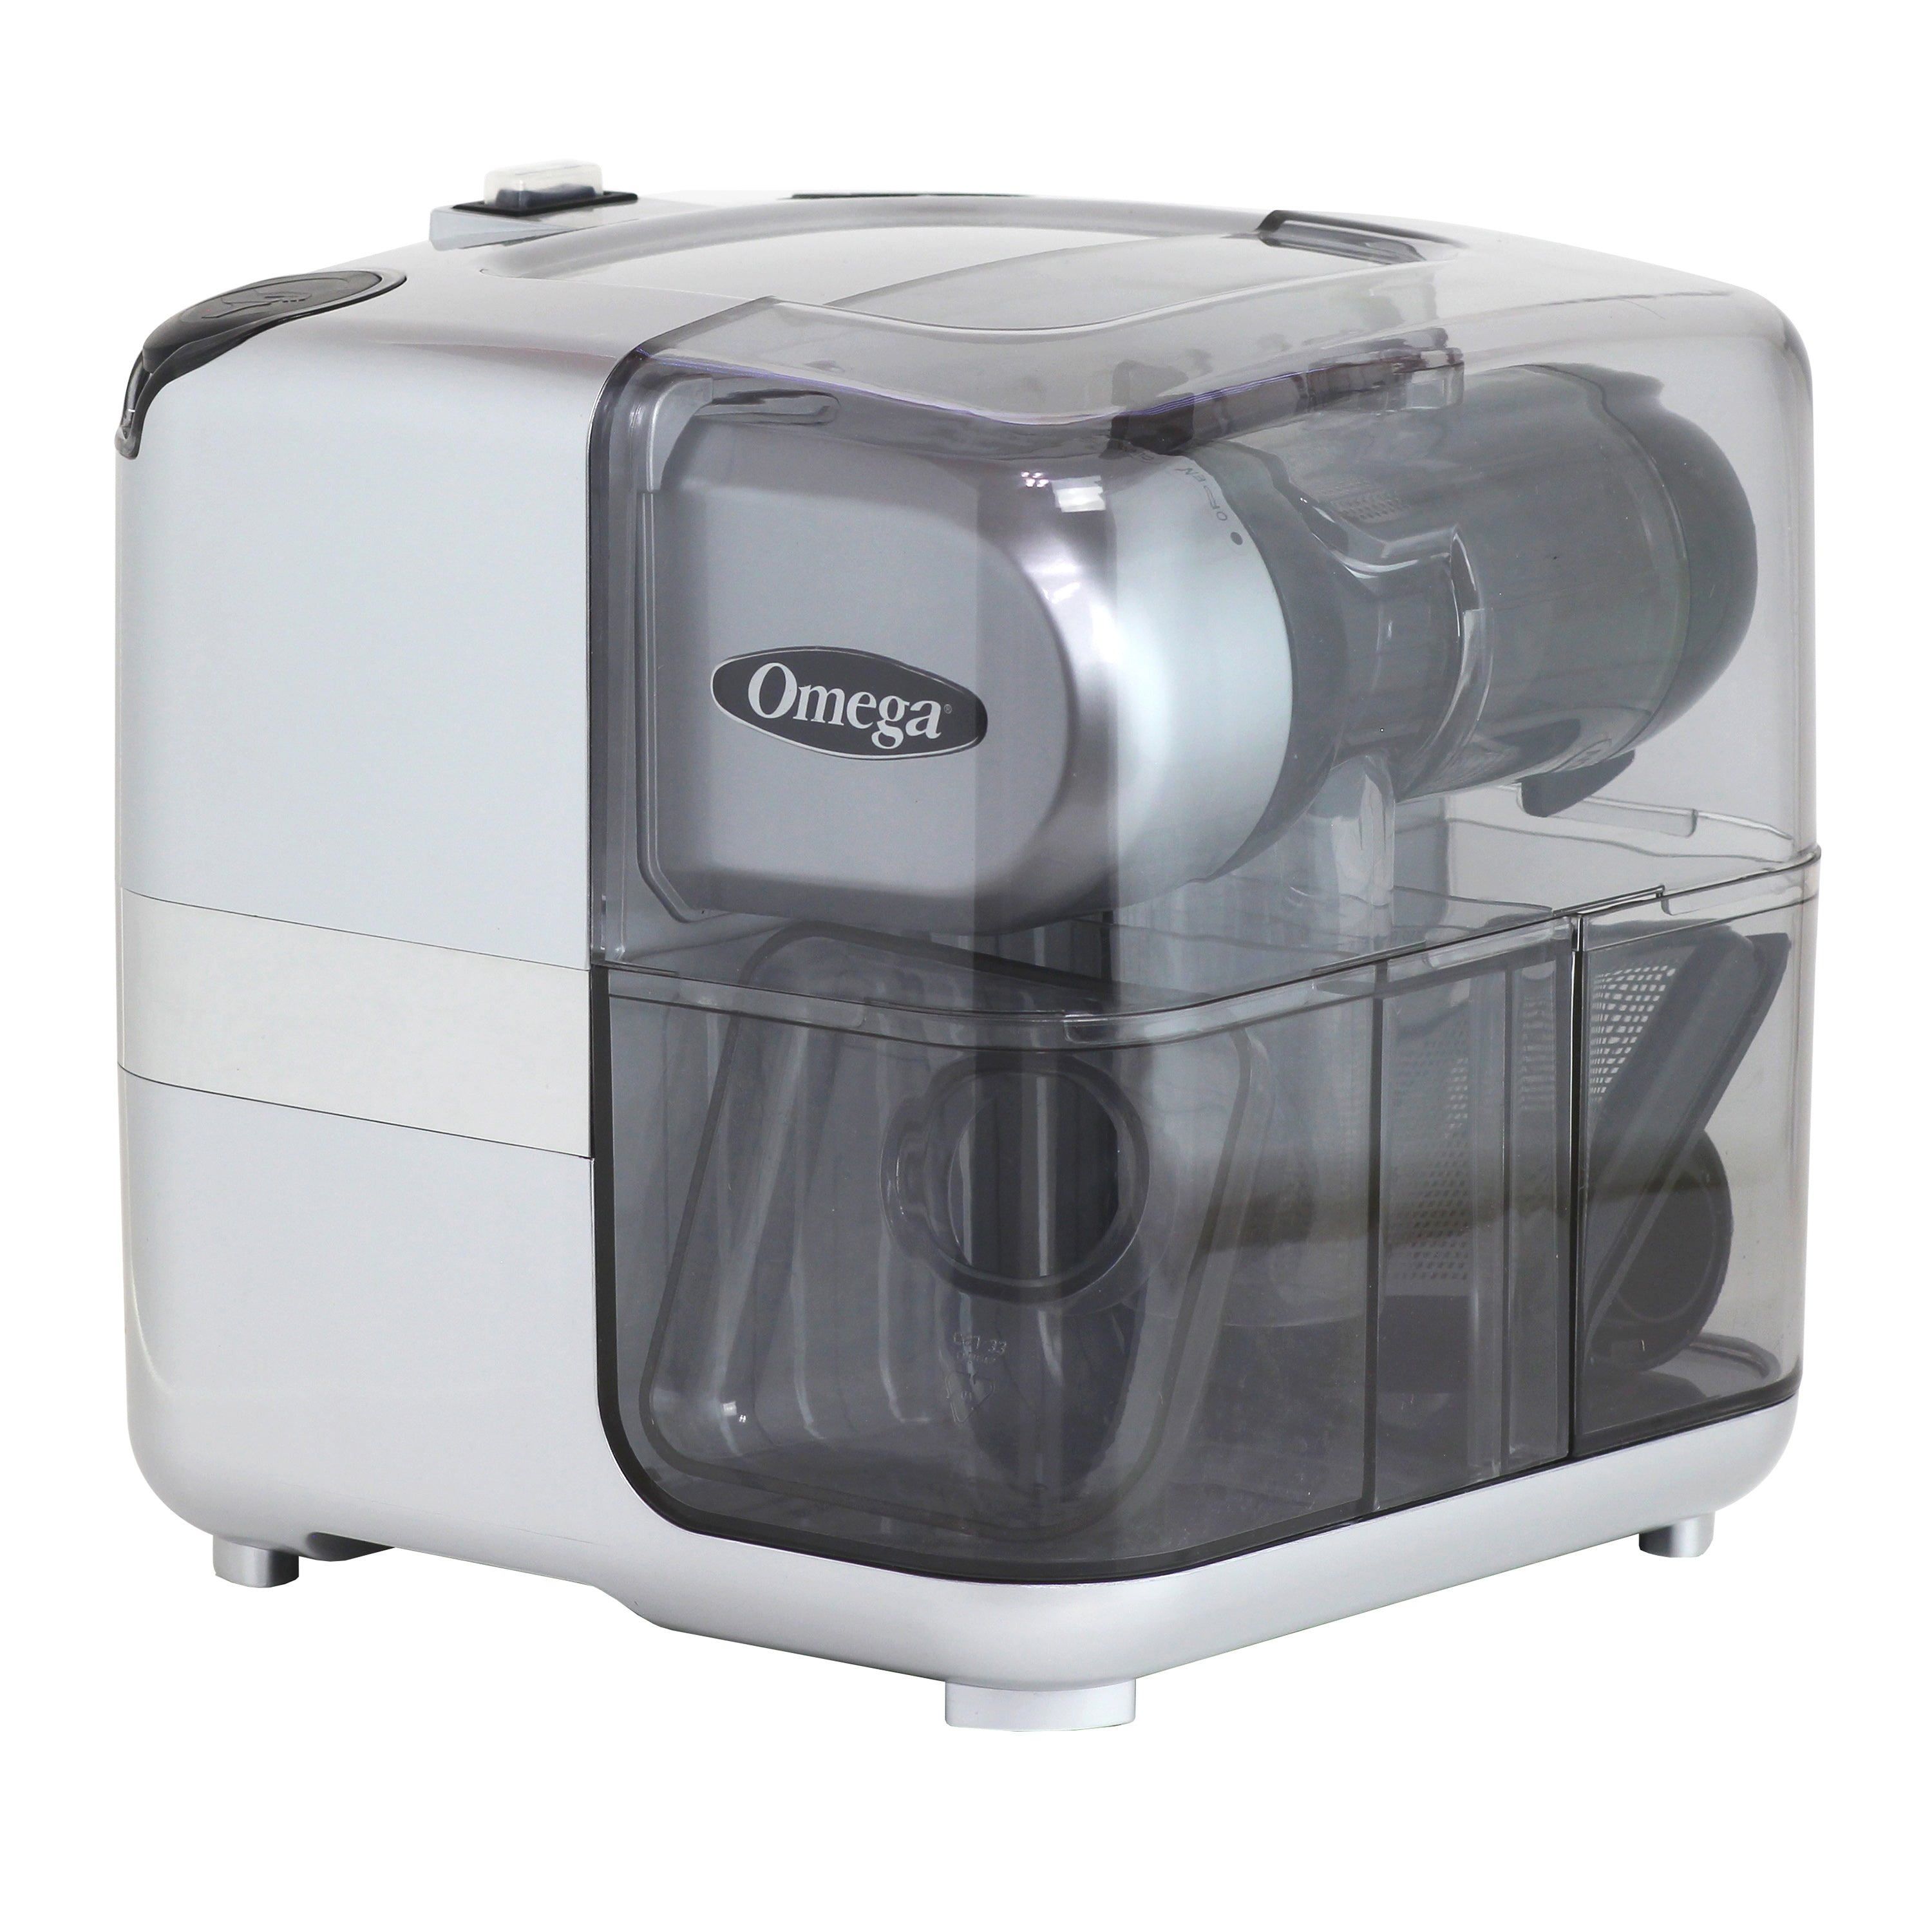 Omega - JCUBE500SV, Omega Cold Press 365 Masticating Slow Juicer and Nutrition System with On-Board Storage, in Silver